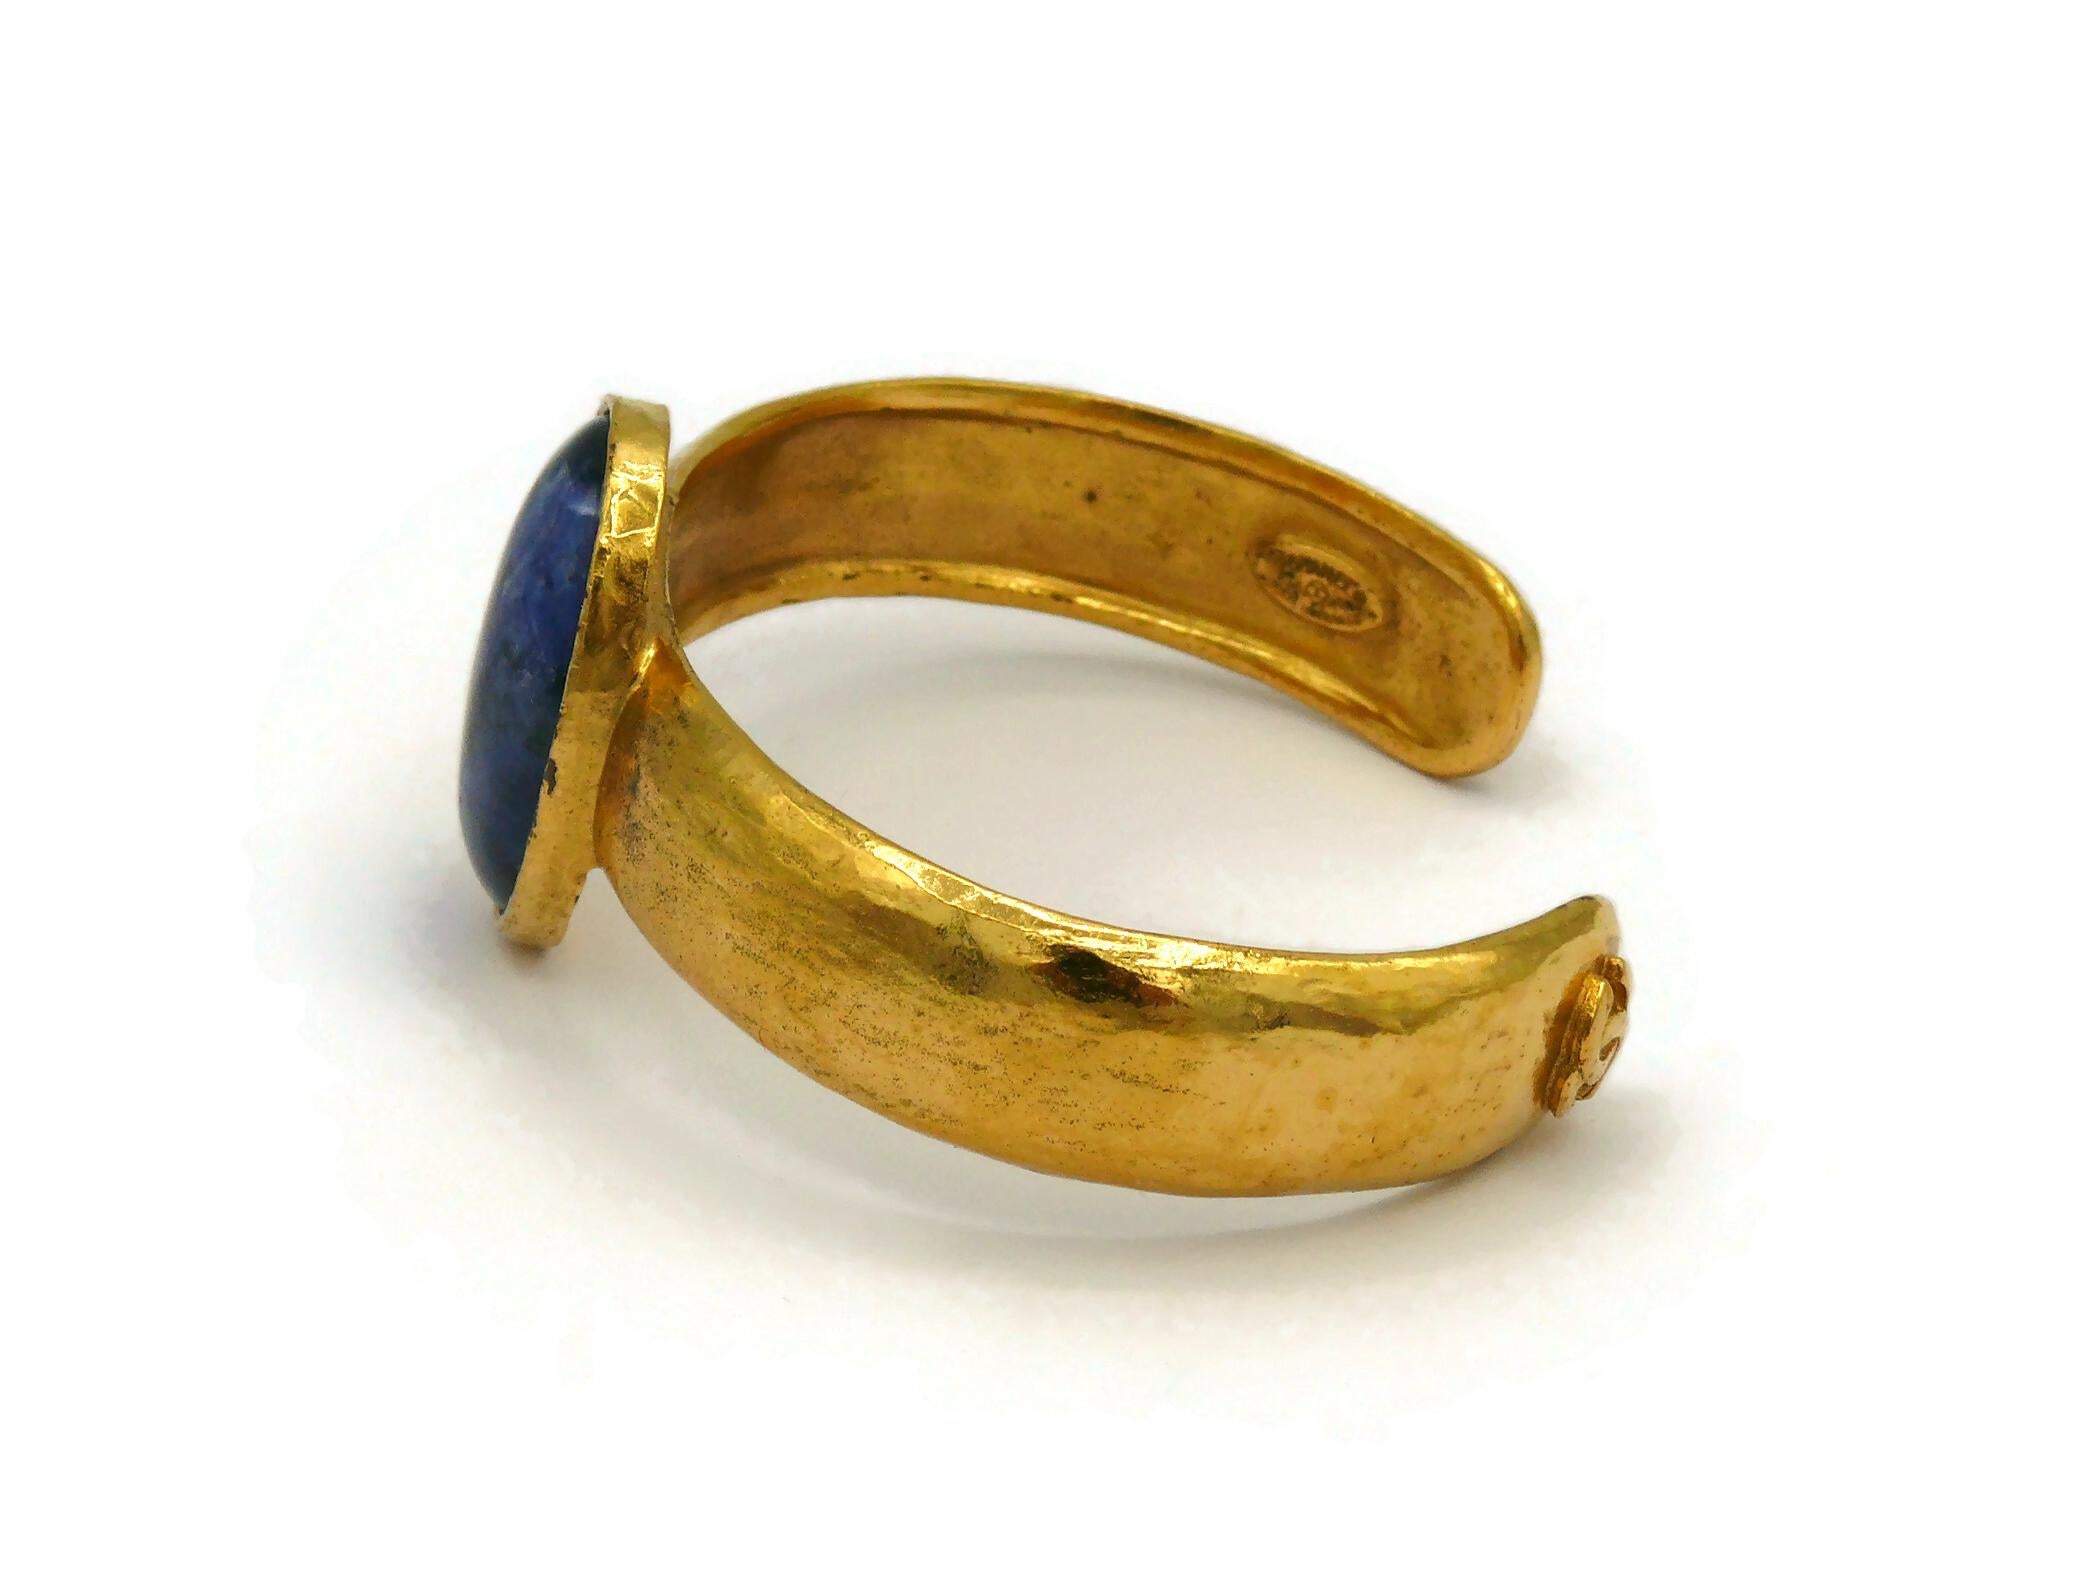 CHANEL by KARL LAGERFELD Vintage Gold Tone Blue Stone Bangle Bracelet, Fall 1996 For Sale 1